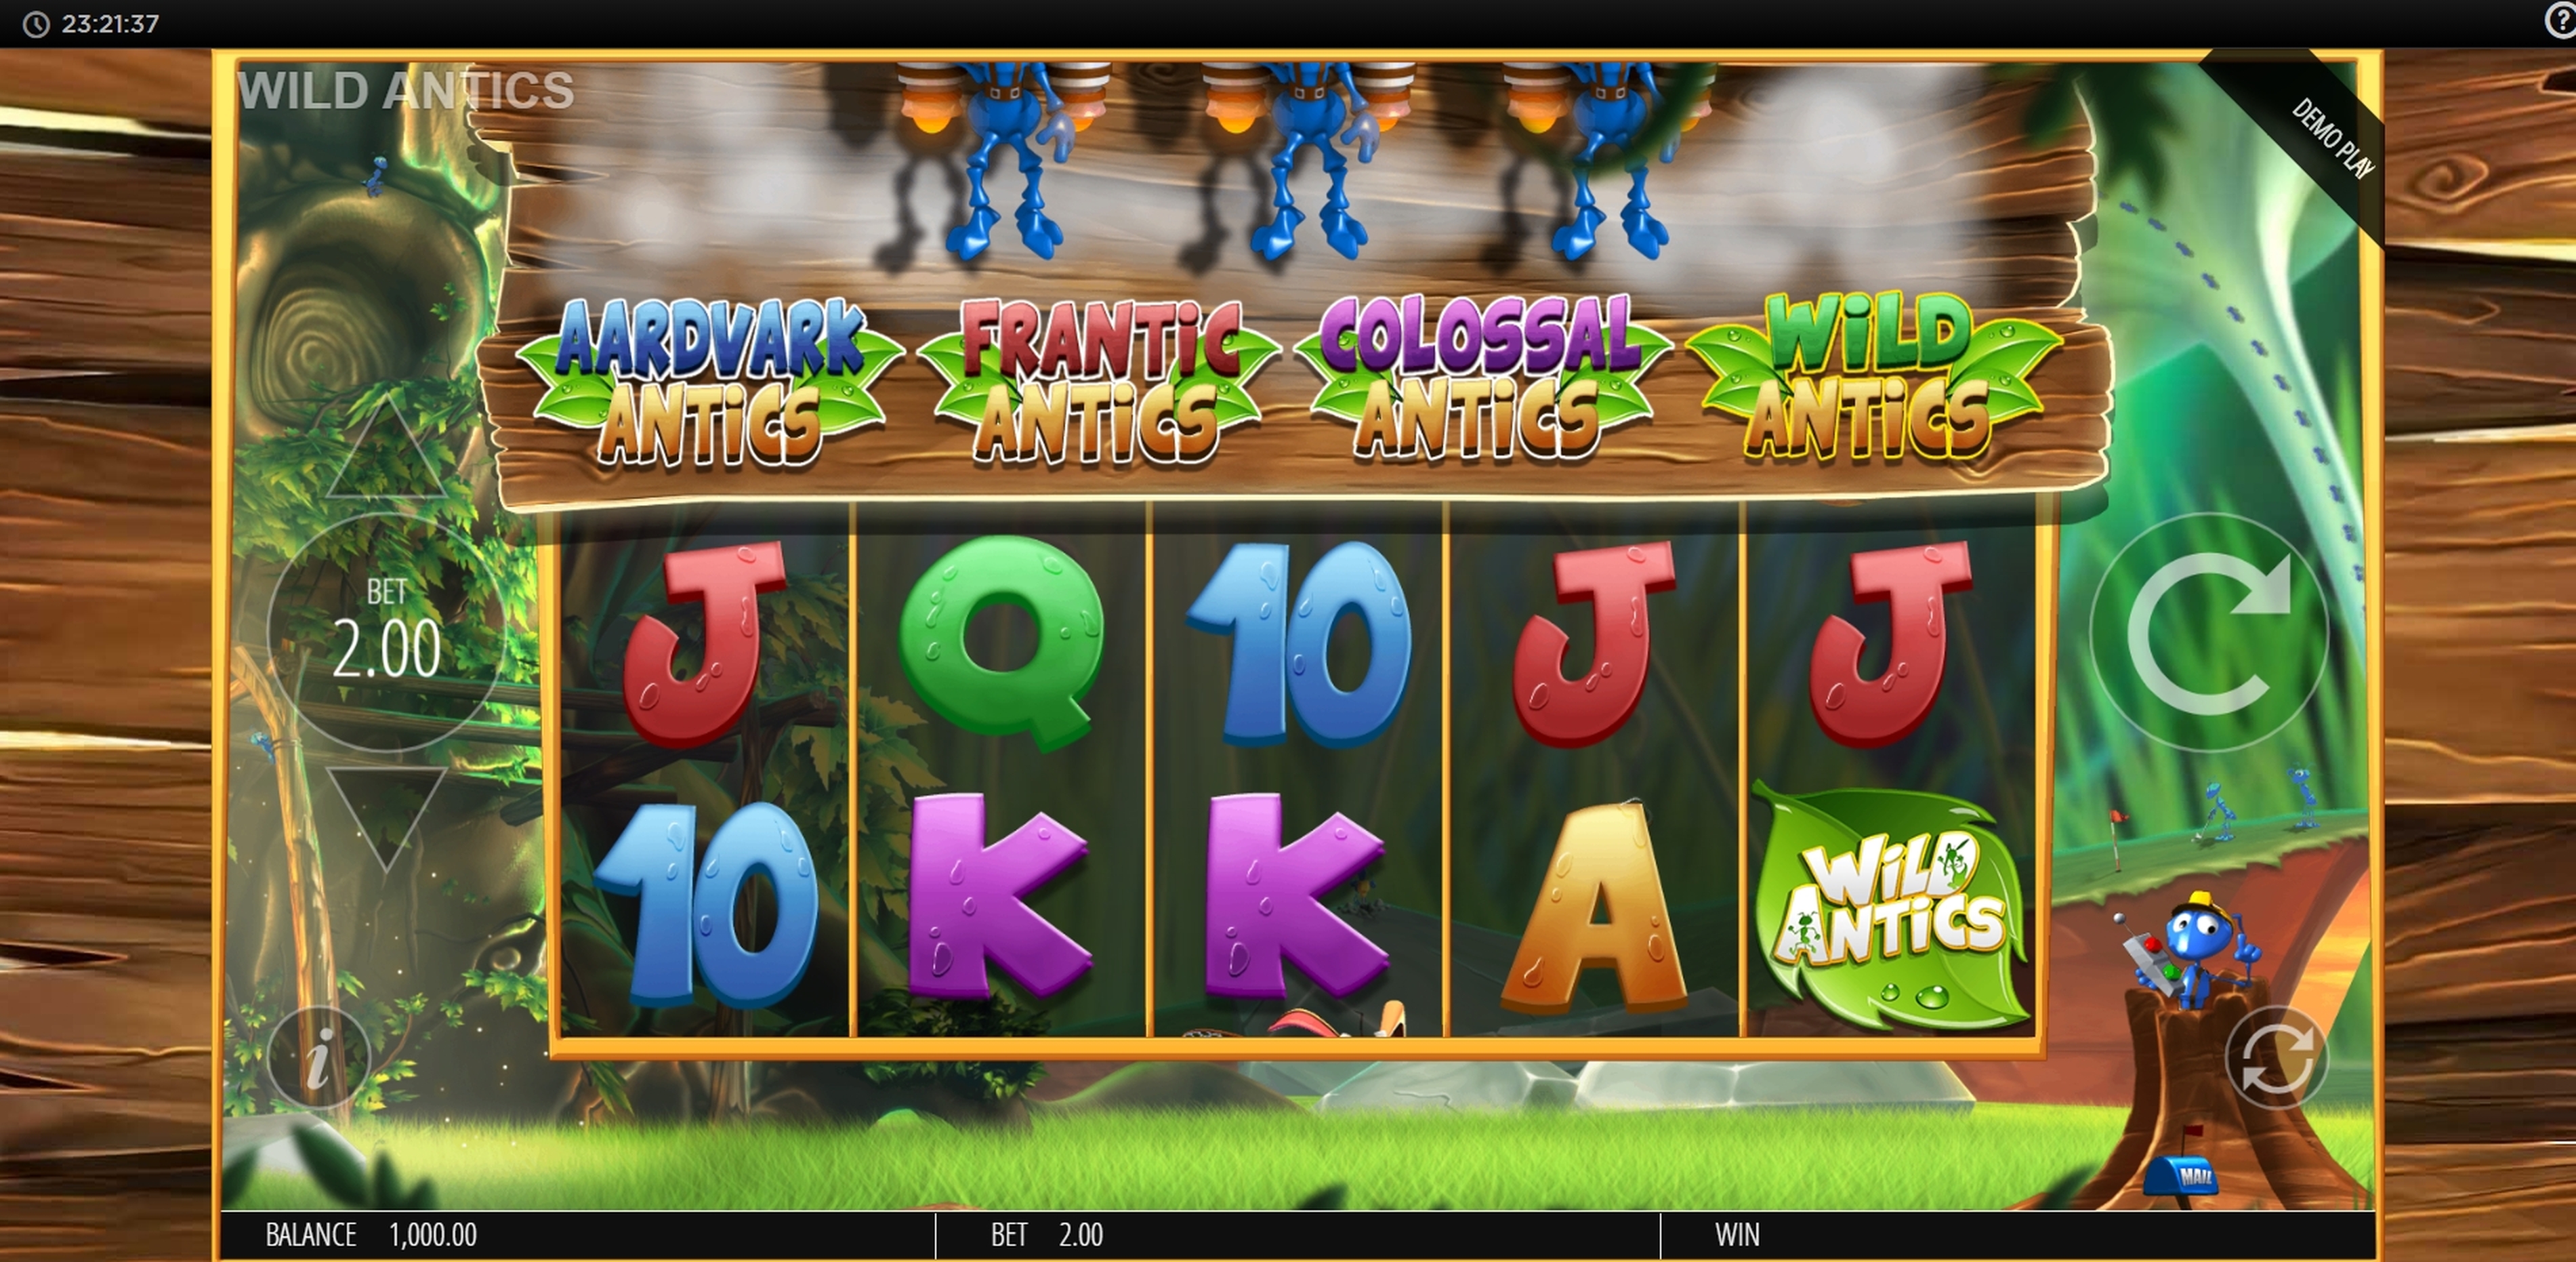 Reels in Wild Antics Slot Game by Blueprint Gaming